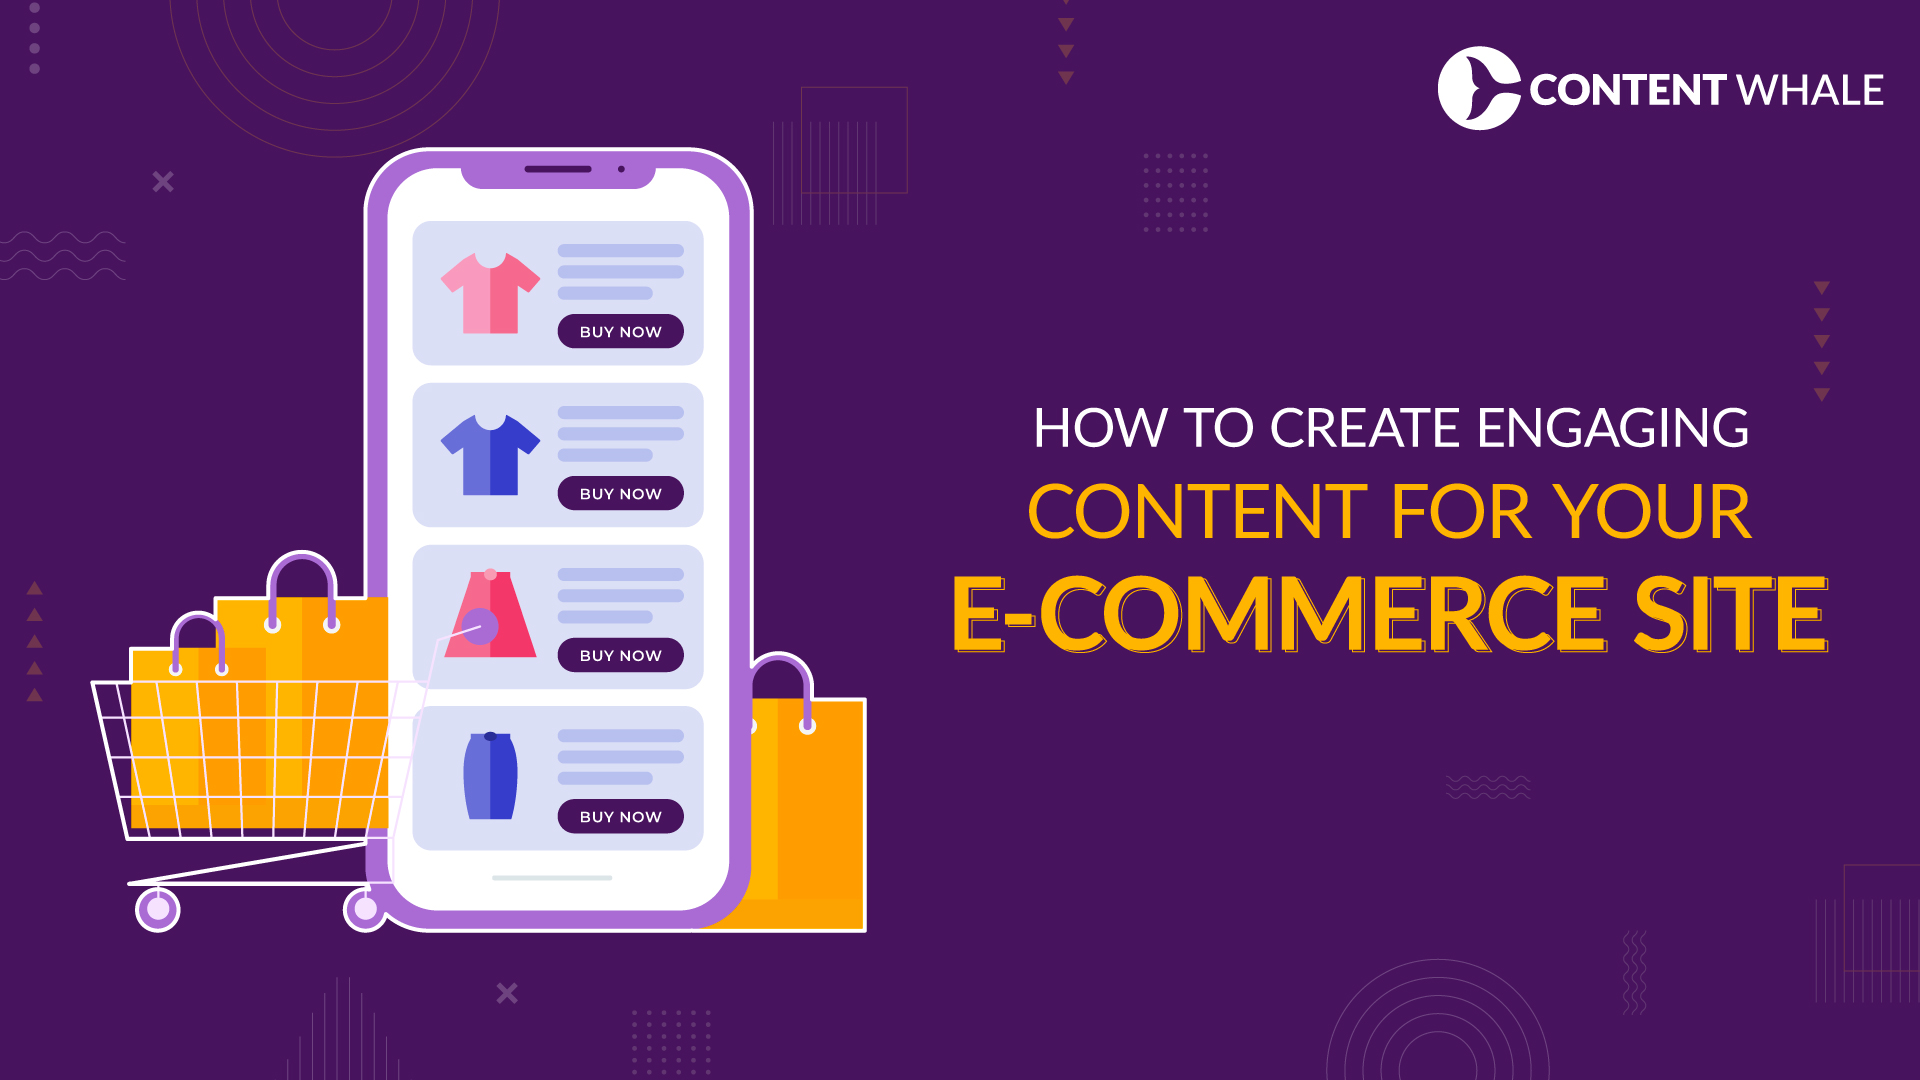 Content for ecommerce website | ecommerce website content | seo of ecommerce websites | how to create engaging content for eCommerce website